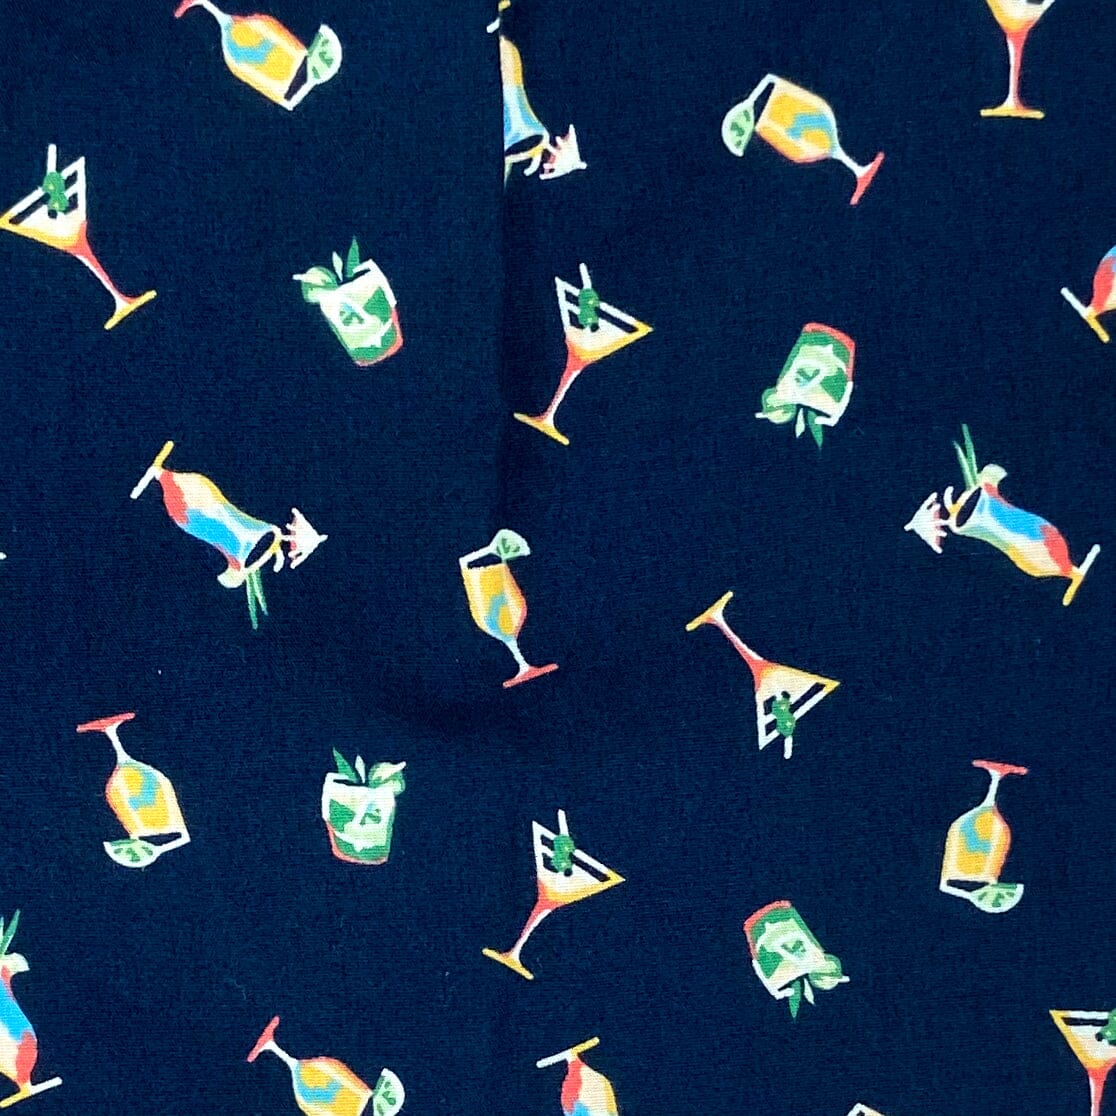 Buy Men's Cocktail Hour Drink Themed Martini Print Cotton Boxer Shorts